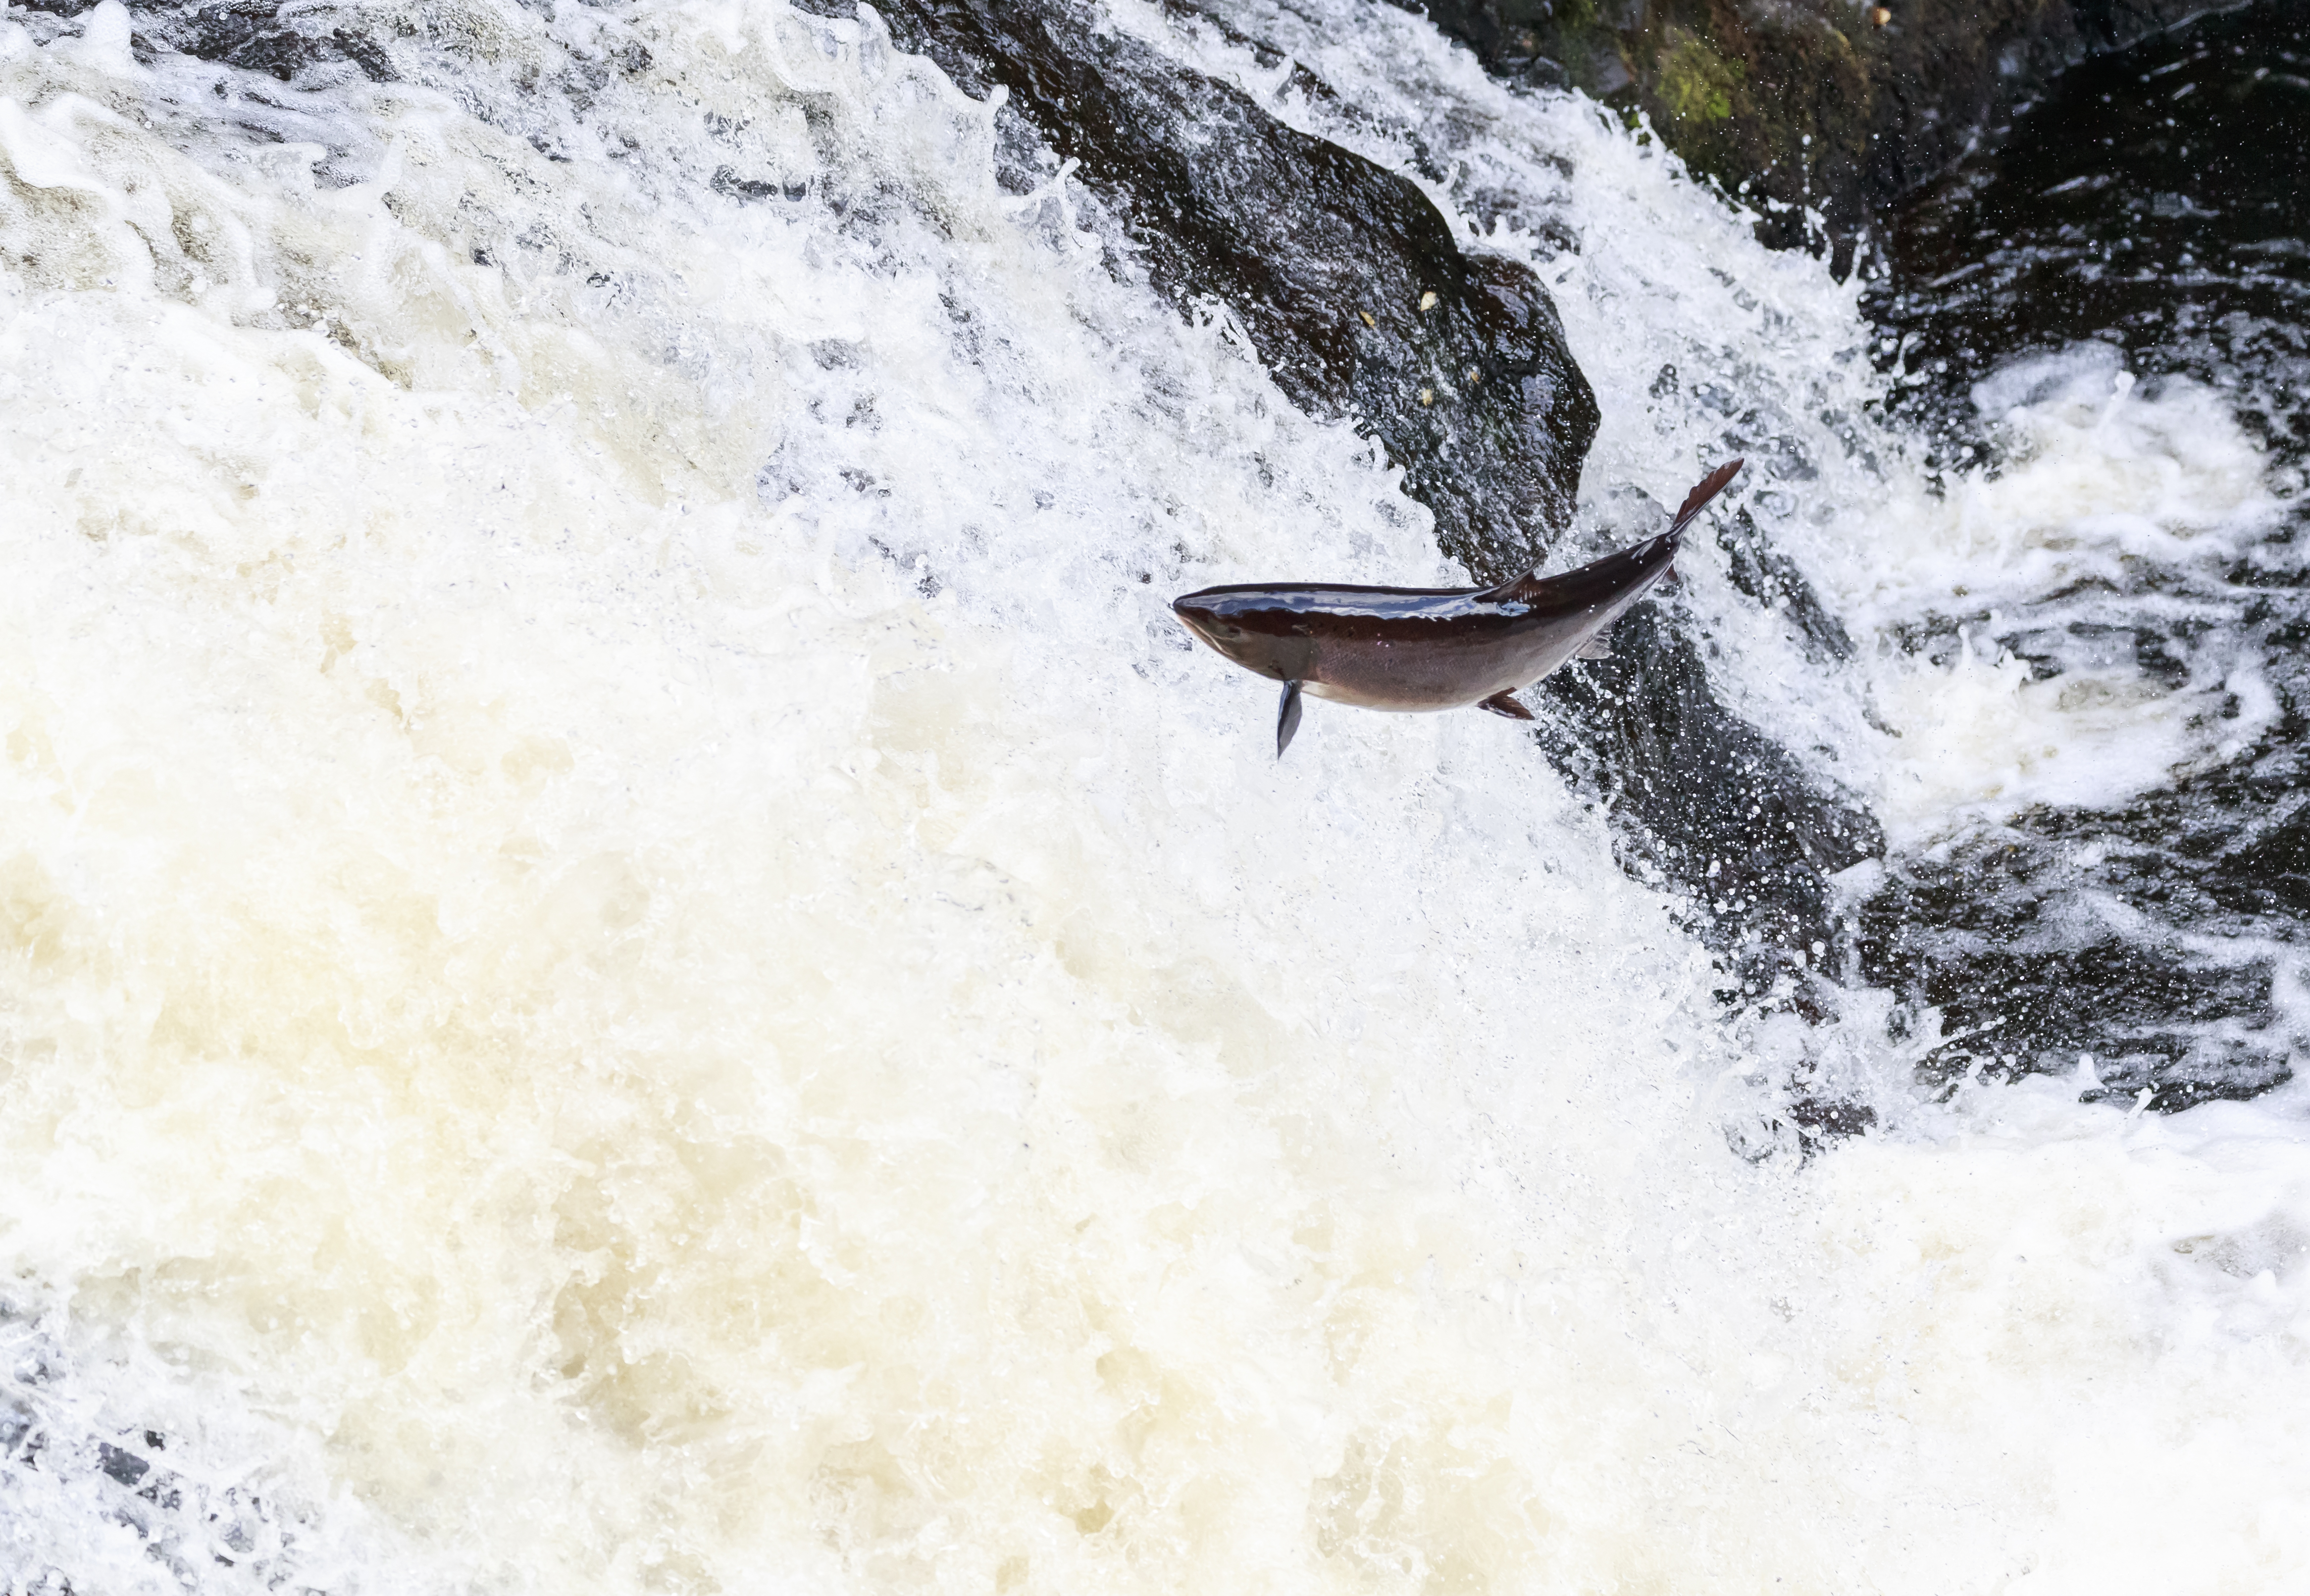 A mighty Atlantic salmon travelling to spawning grounds.